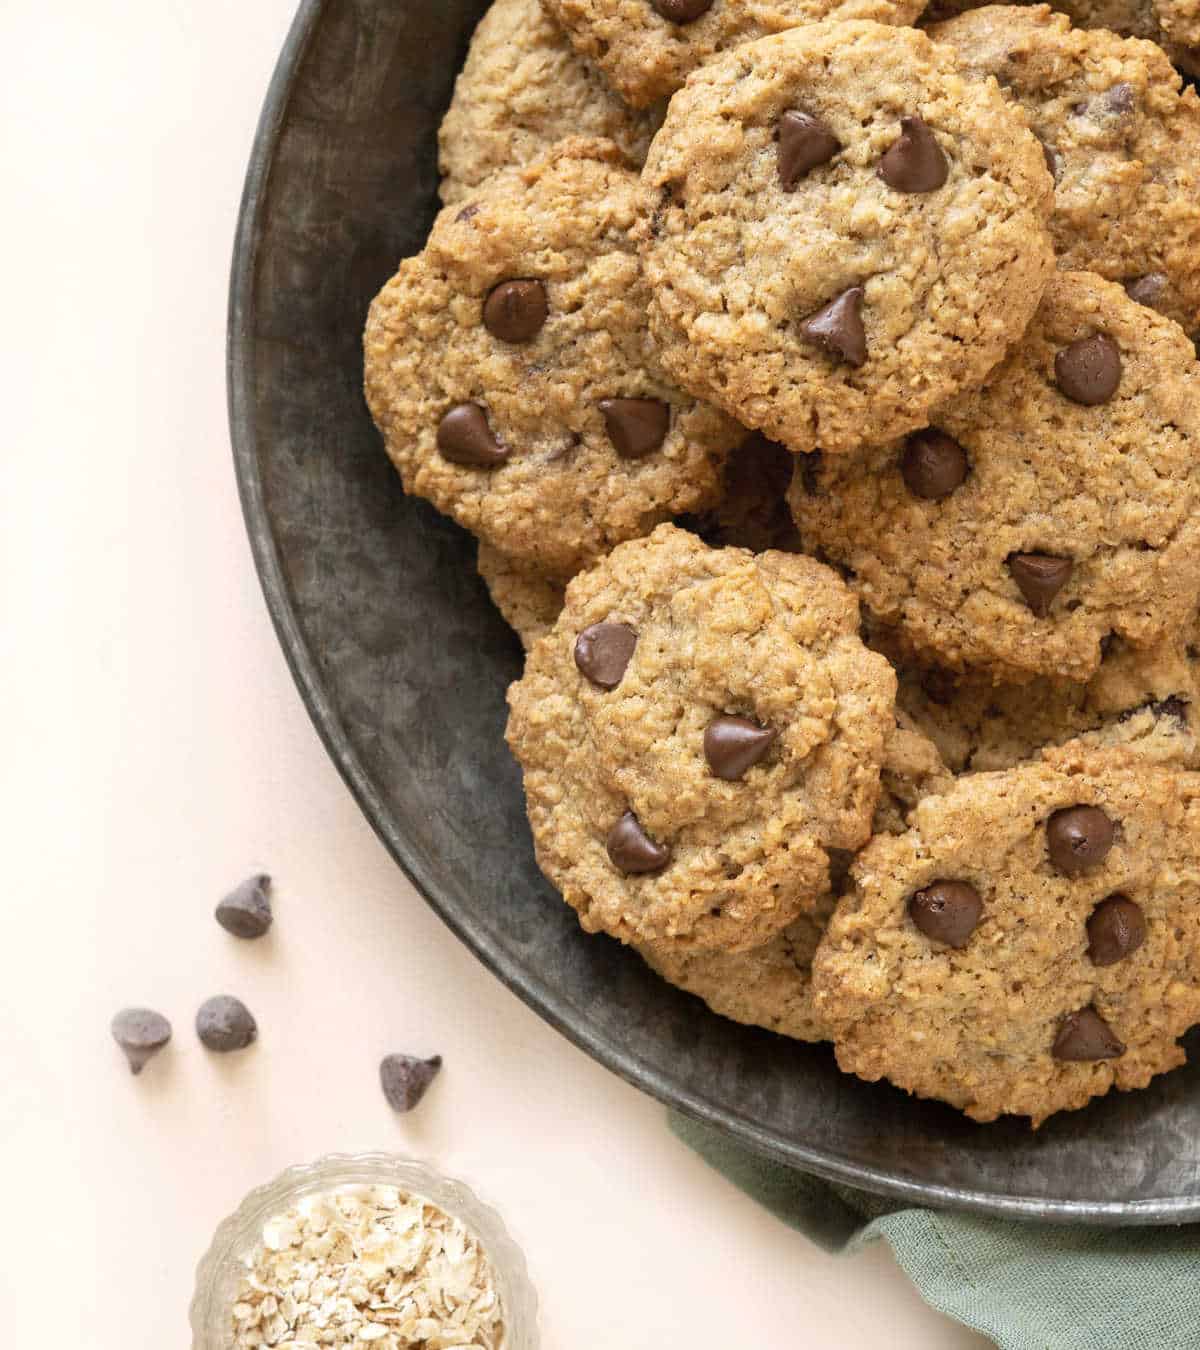 A metal plate with chocolate chip oatmeal cookies in a pile. Light peach surface. 